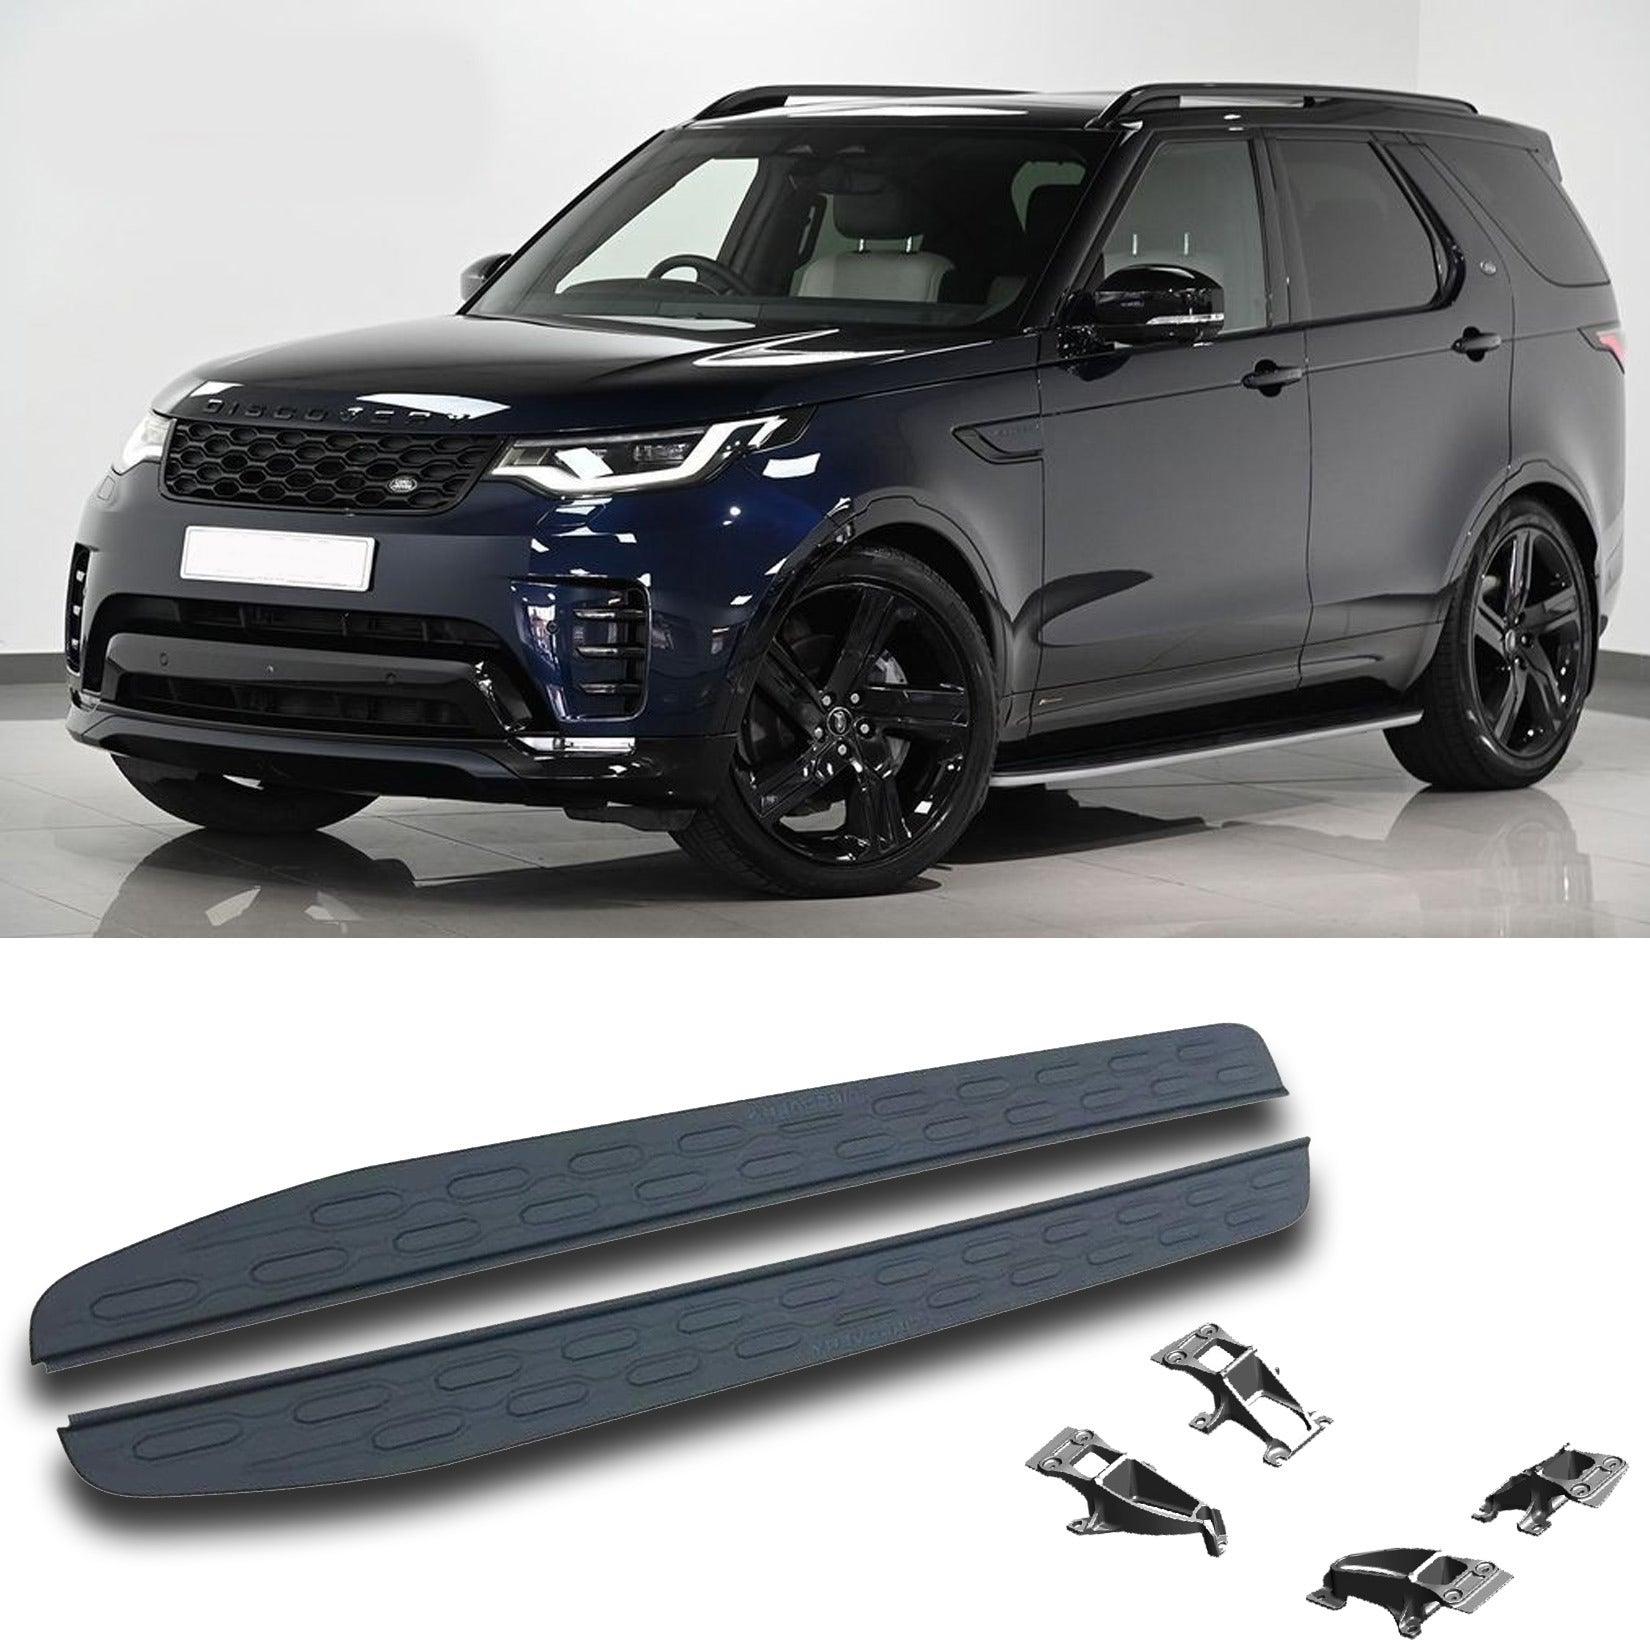 LAND ROVER DISCOVERY 5 2017 ON OEM STYLE SIDE STEPS RUNNING BOARDS - PAIR - BLACK/SILVER - Storm Xccessories2